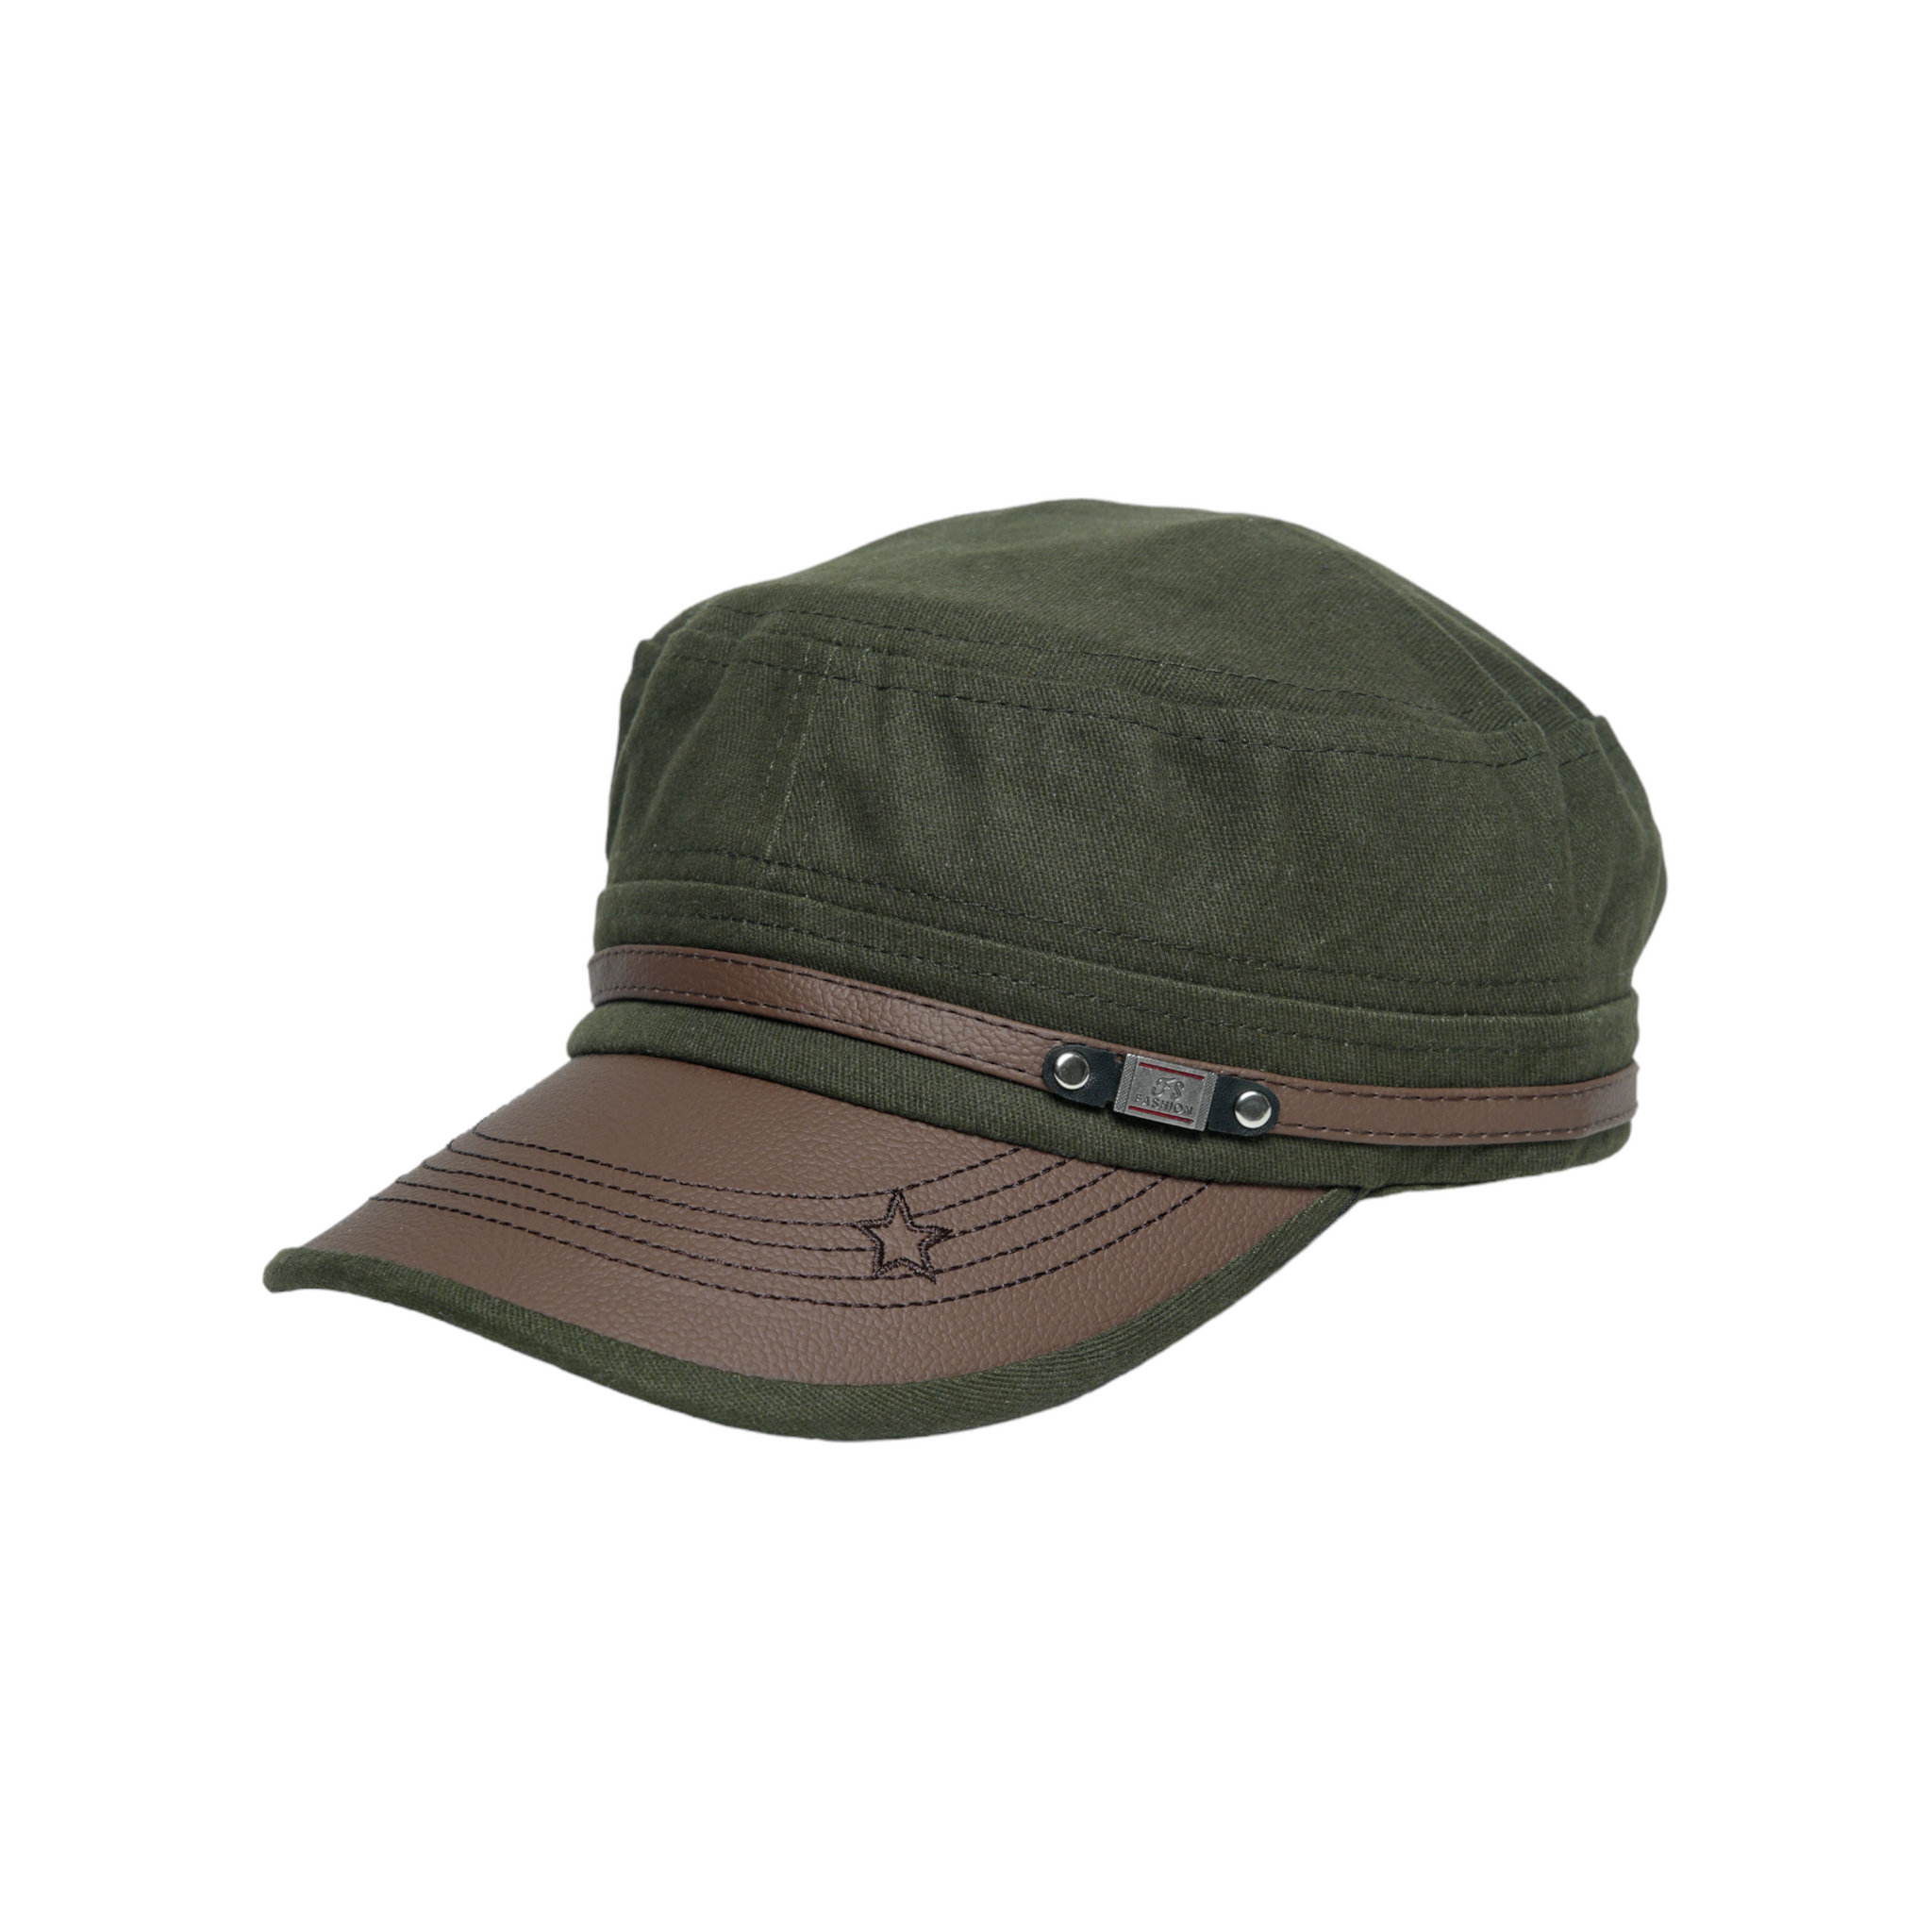 Chokore Breathable Flat Top Cap with Belt (Army Green)